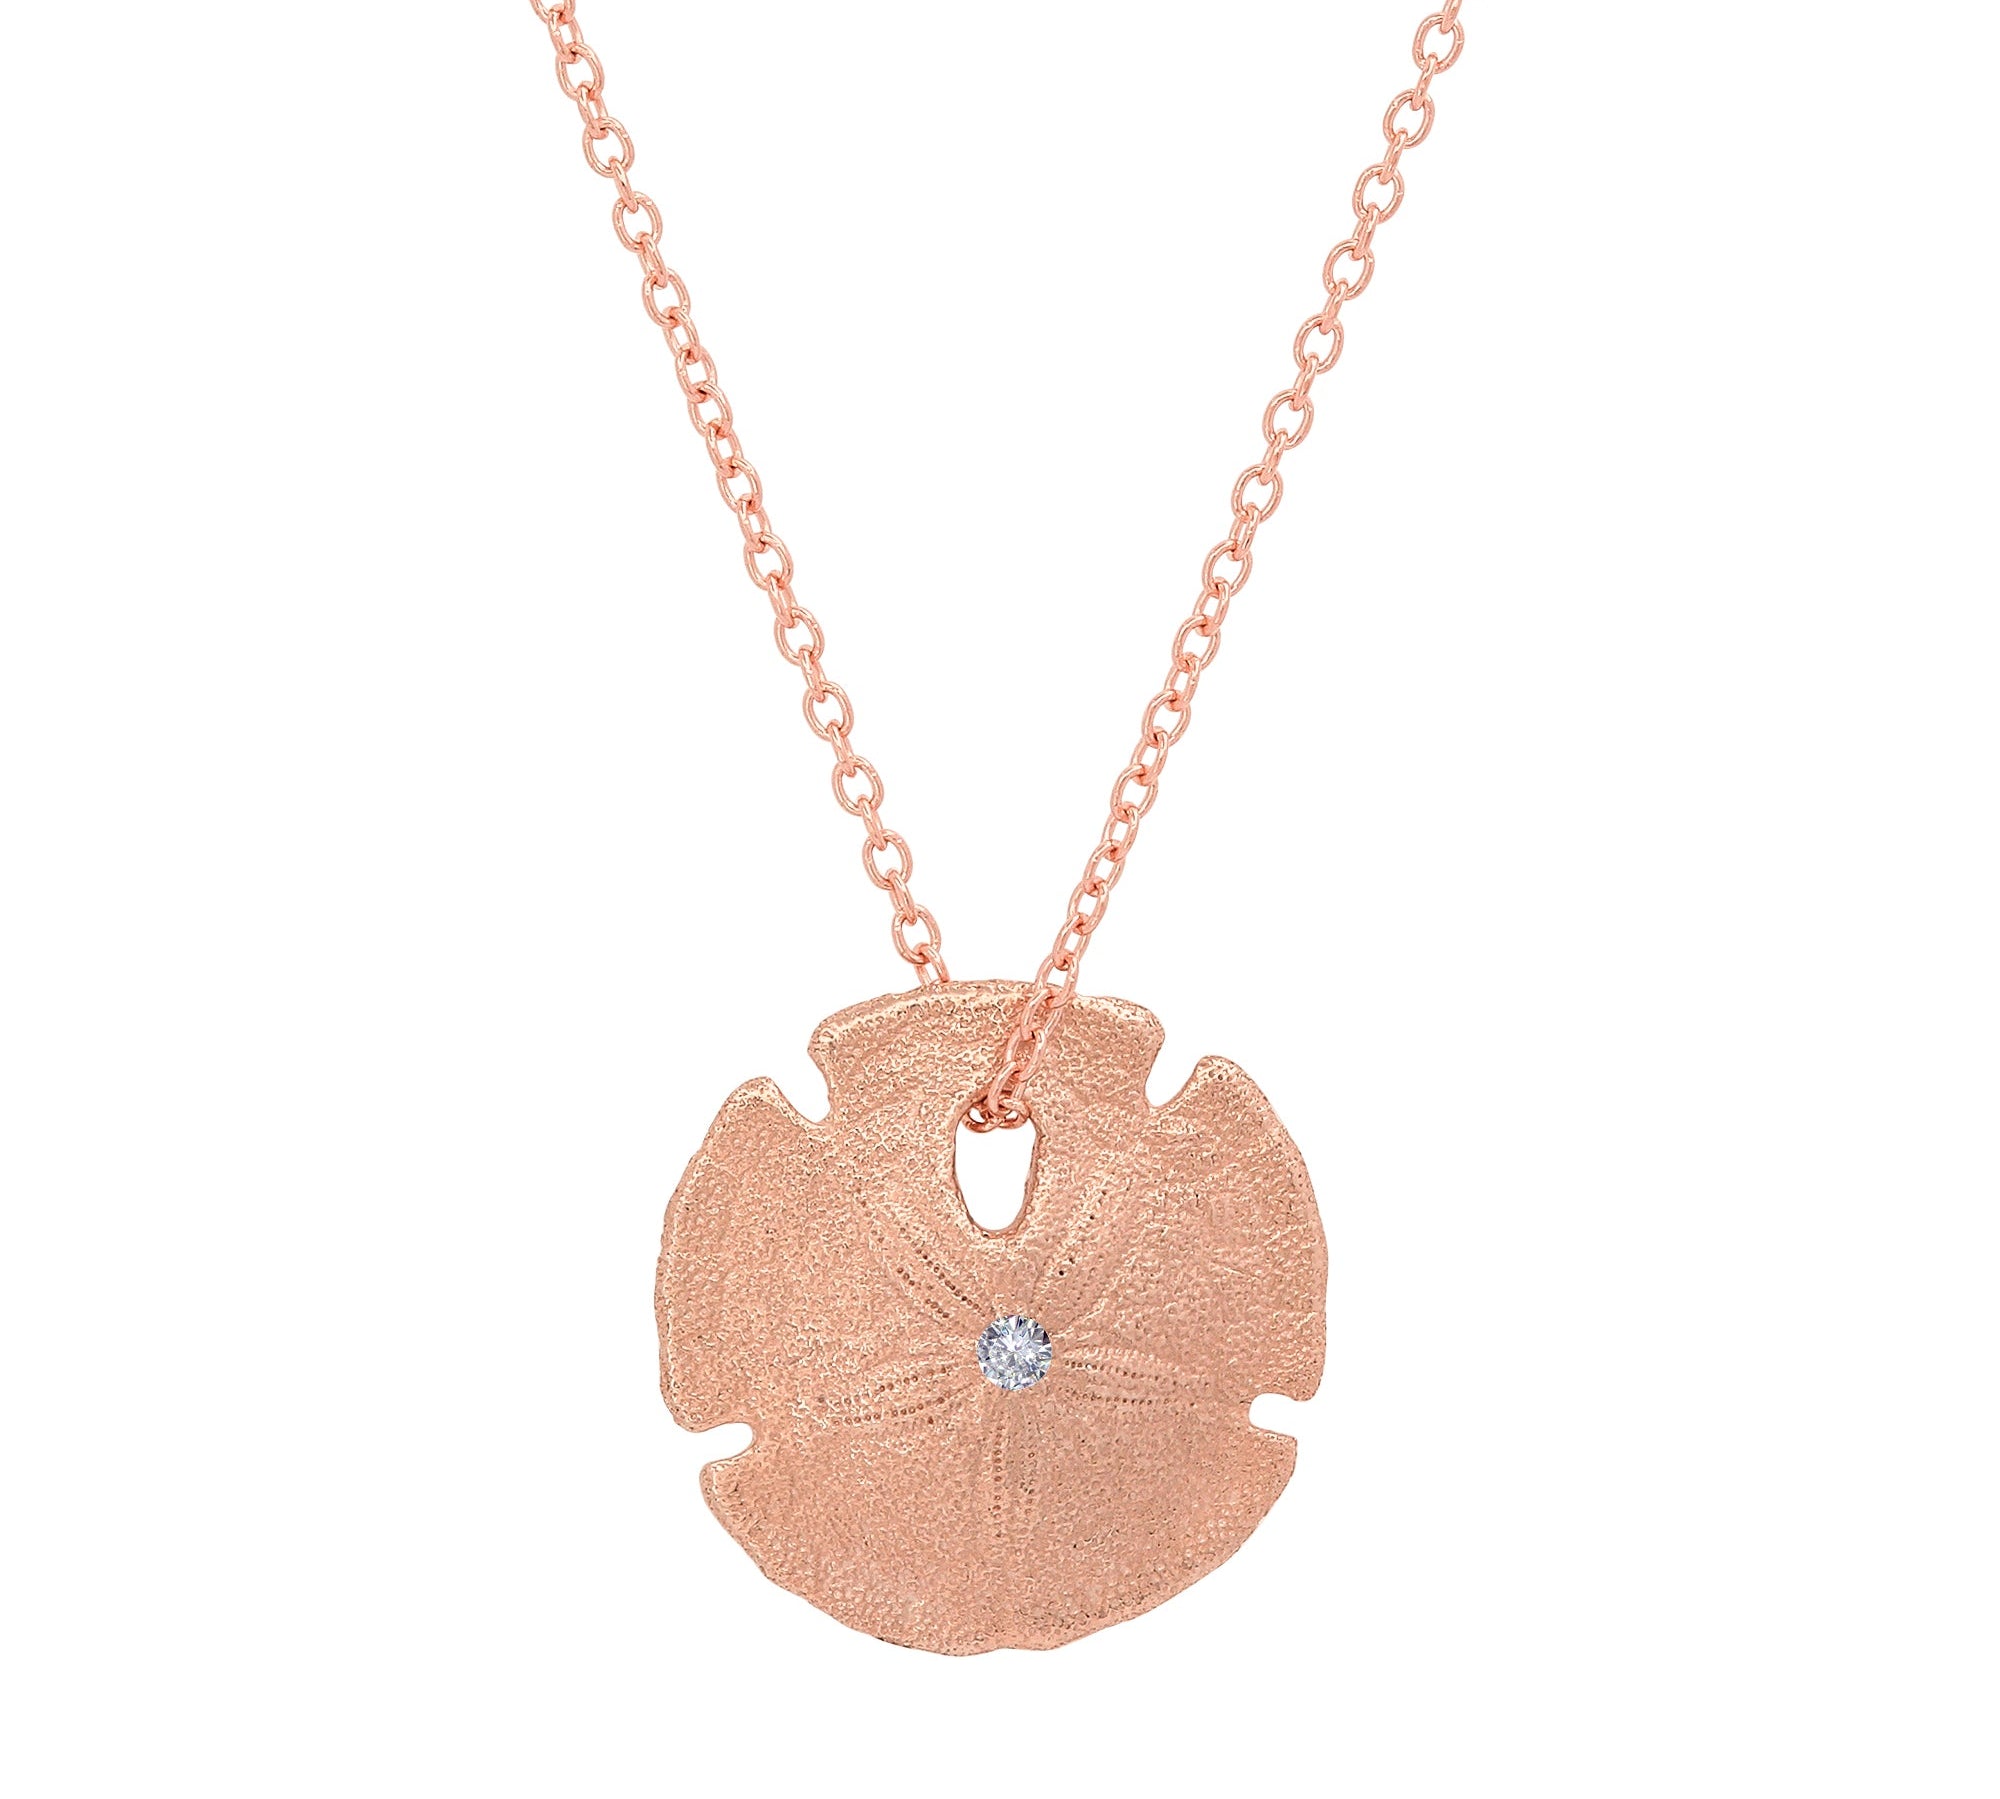 Small Sand Dollar Necklace Pendant Elisabeth Bell Jewelry Rose Gold  